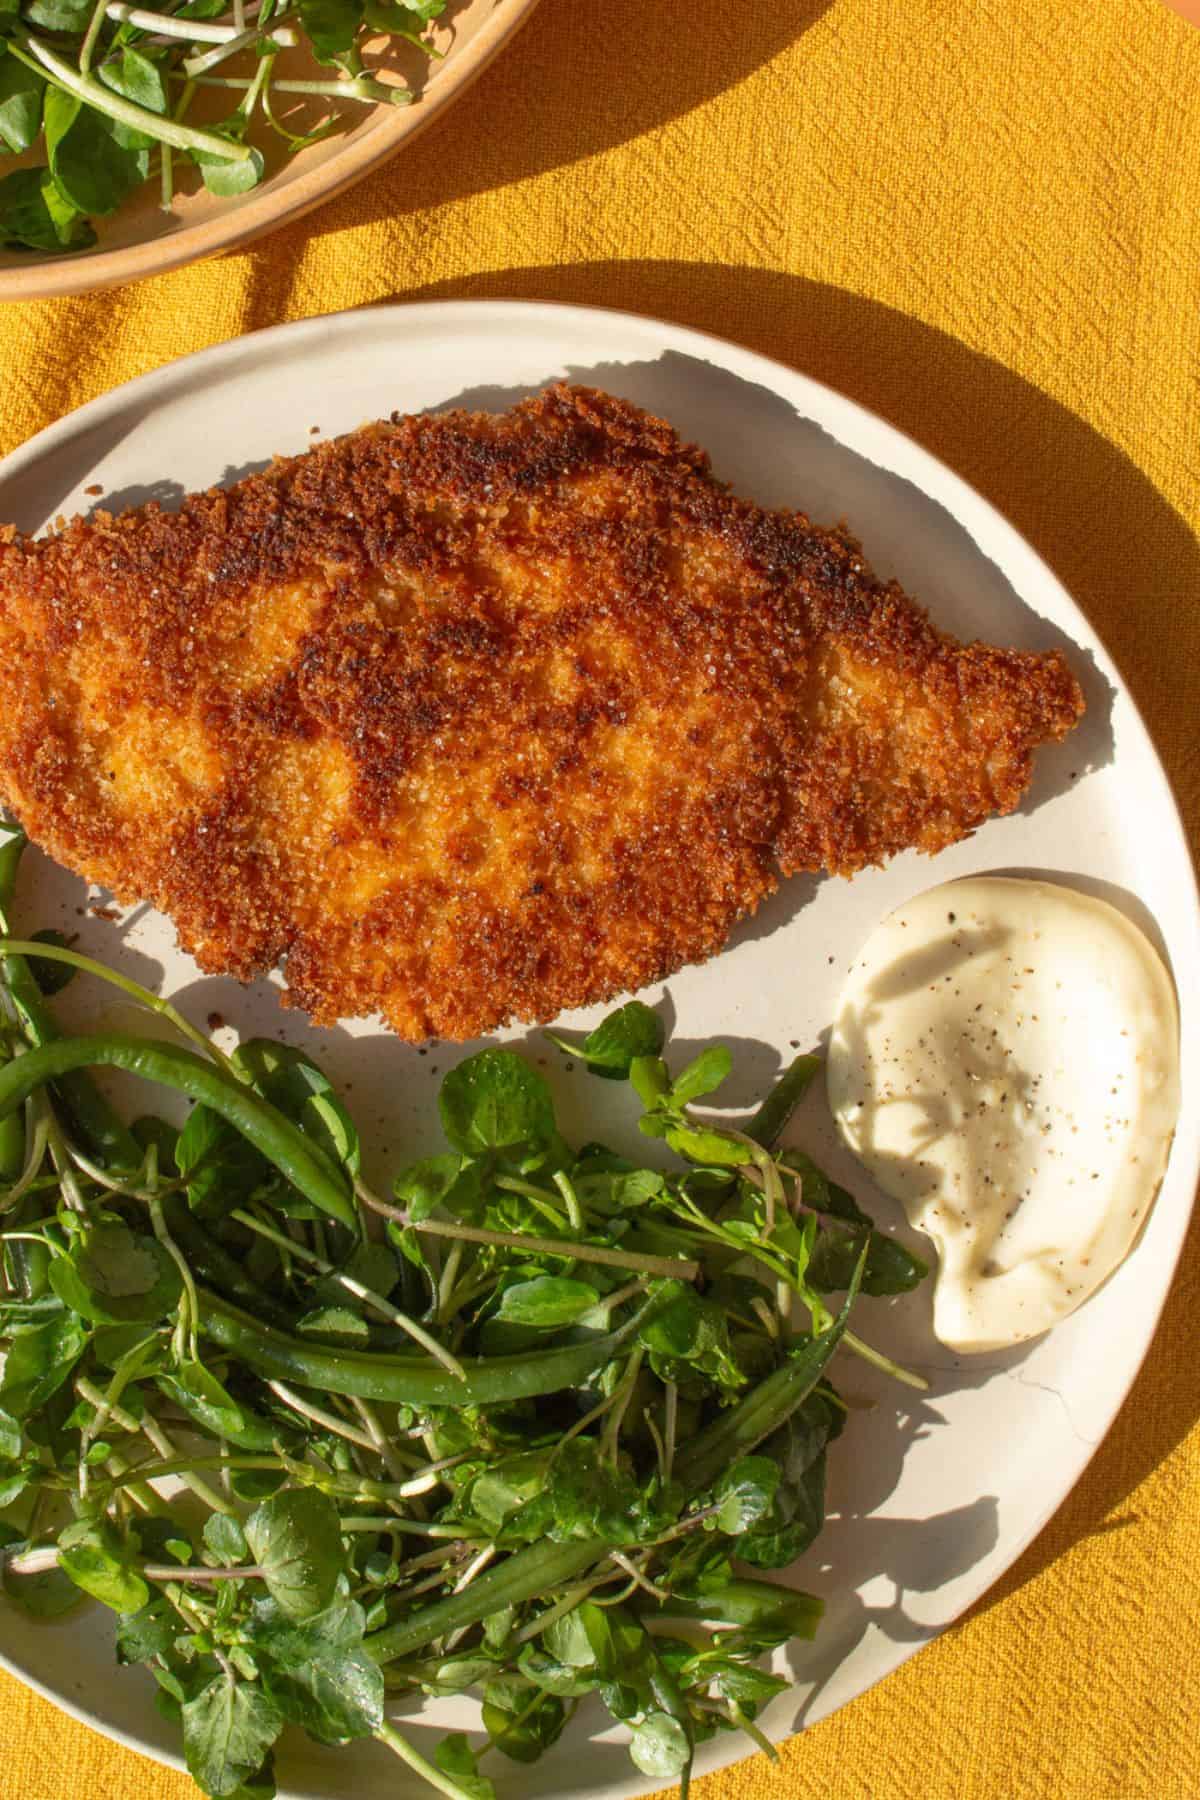 Pork schnitzel on a plate with watrcress and beans and some aoili.